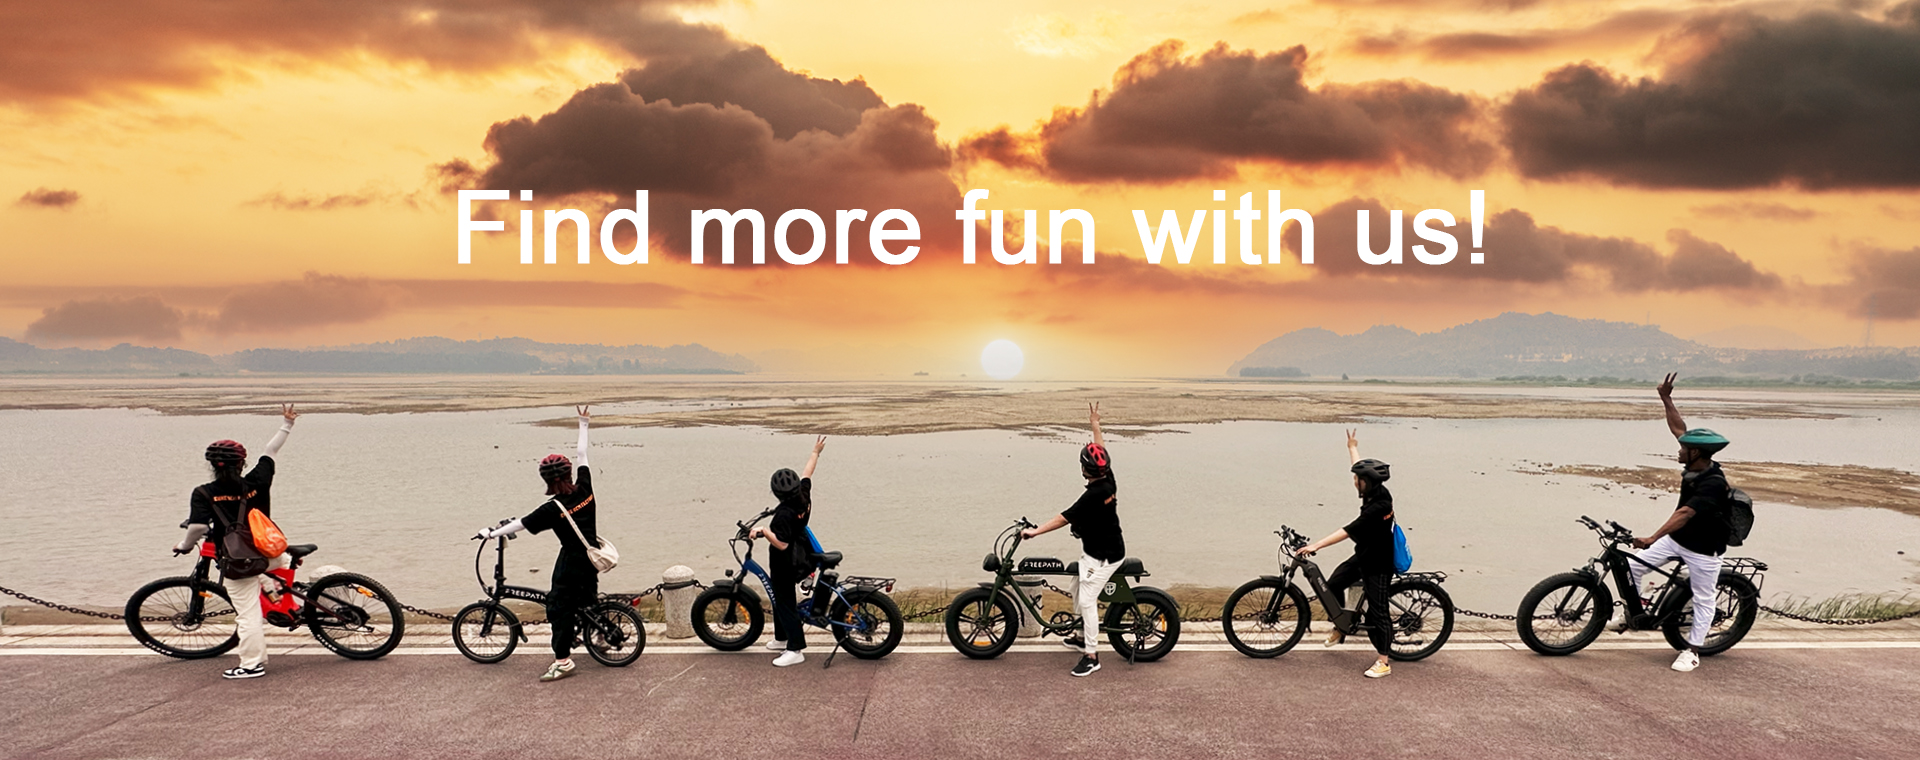 Freepath electric bikes, you can find more fan with us!